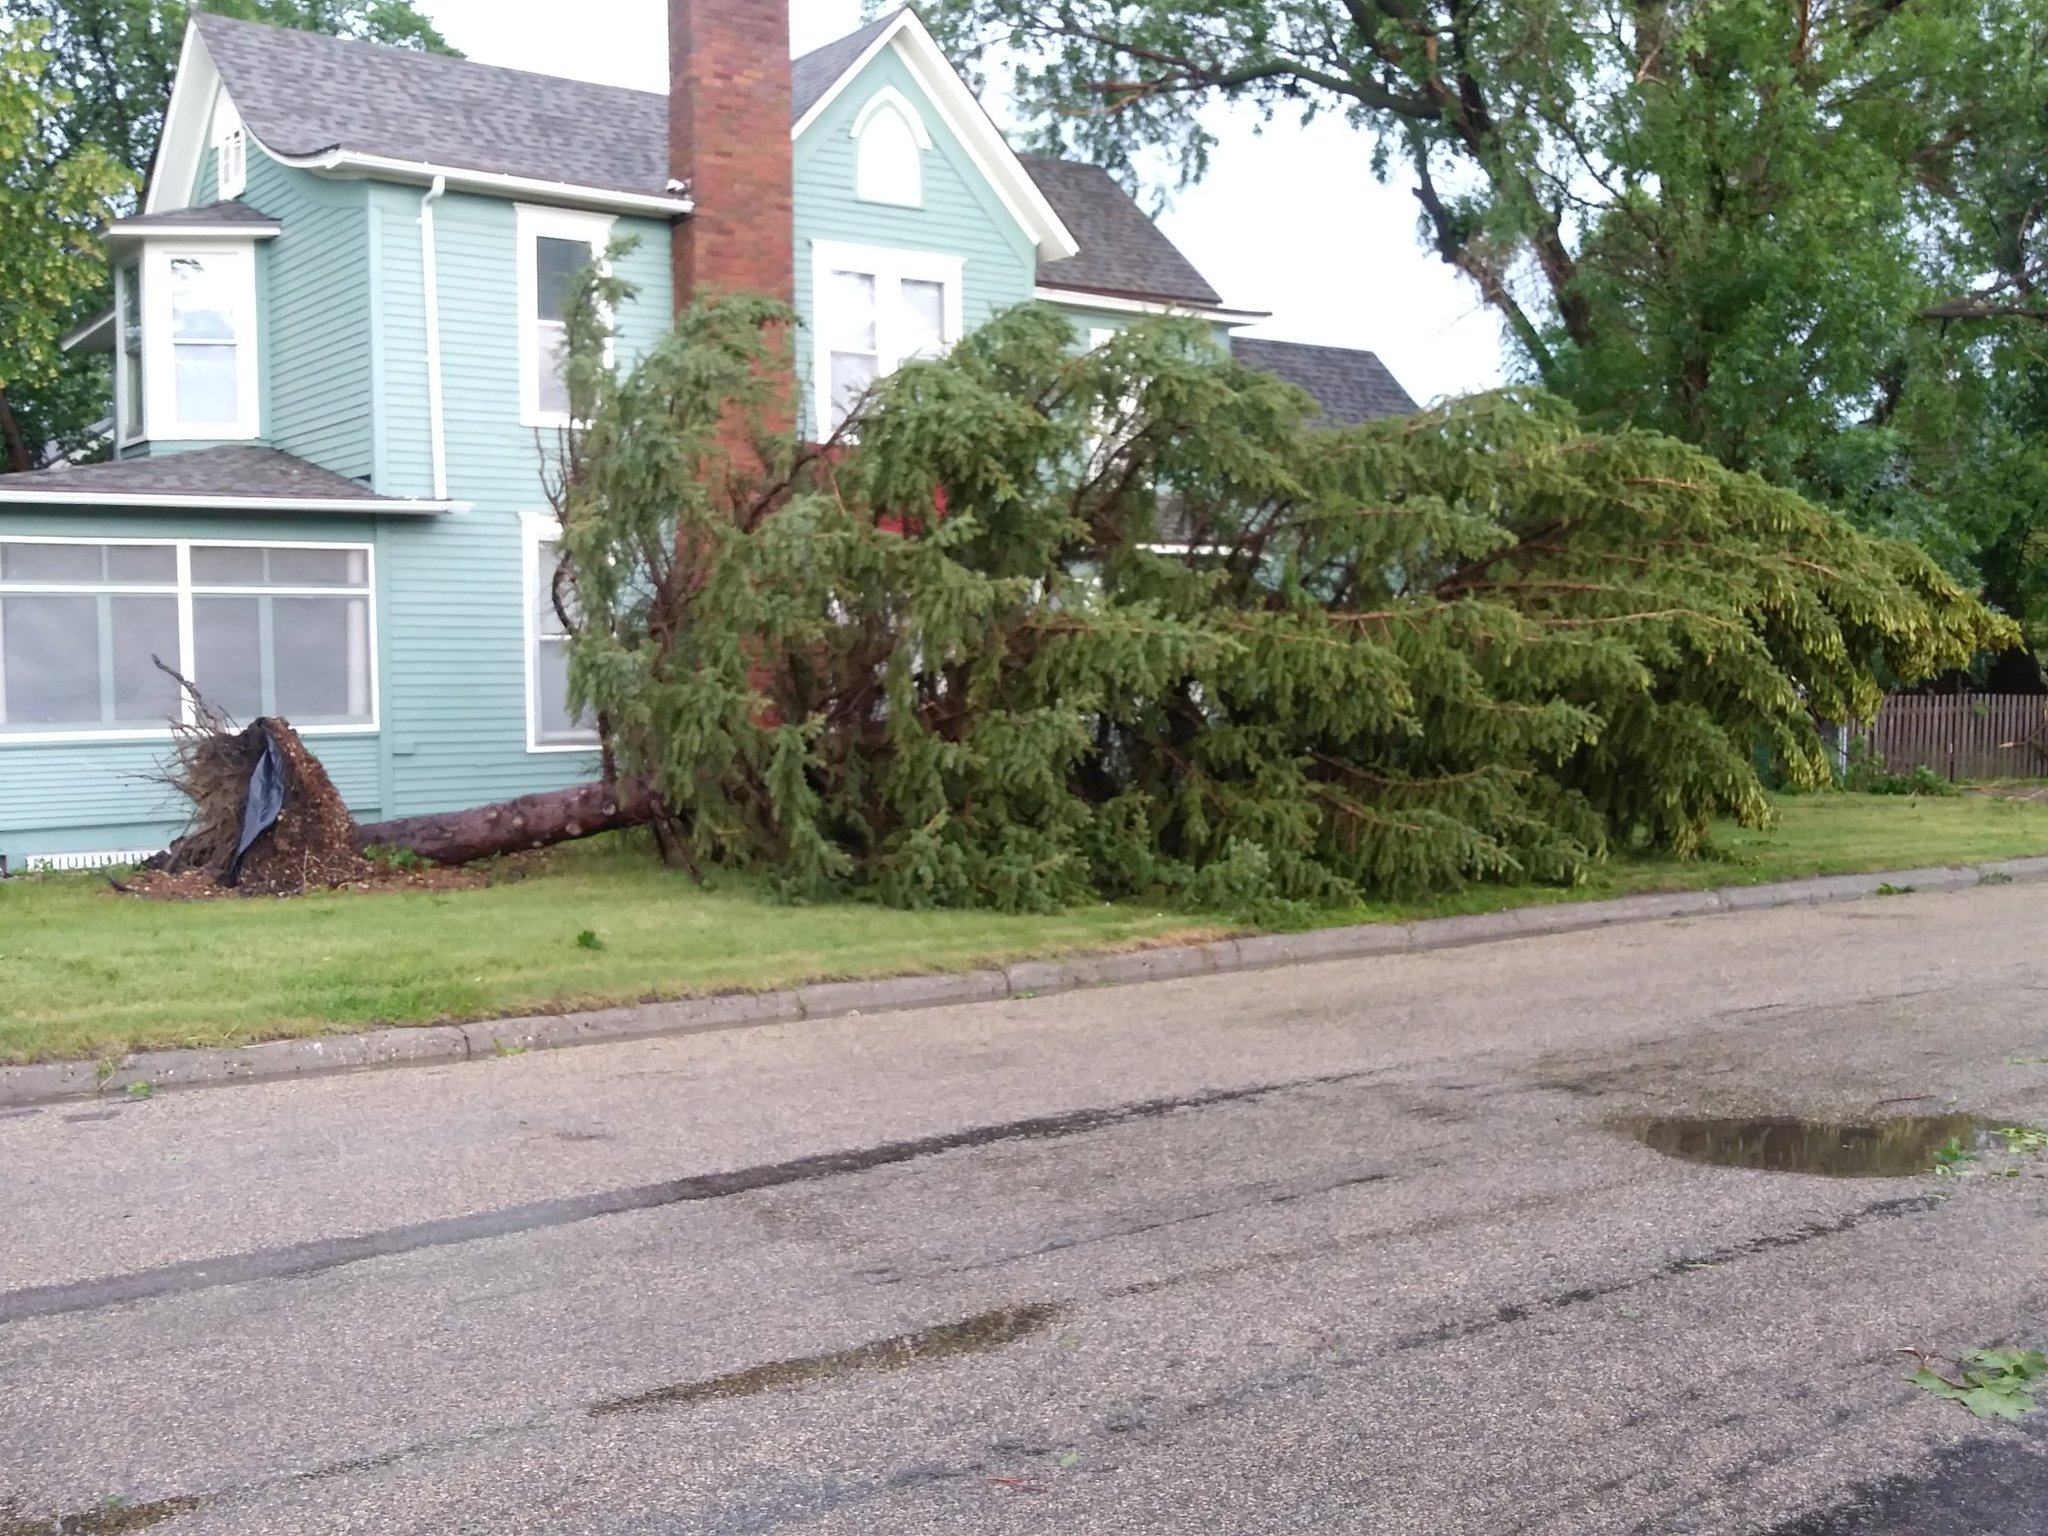 Tree uprooted in Miller, SD - Photo from KCCR Radio